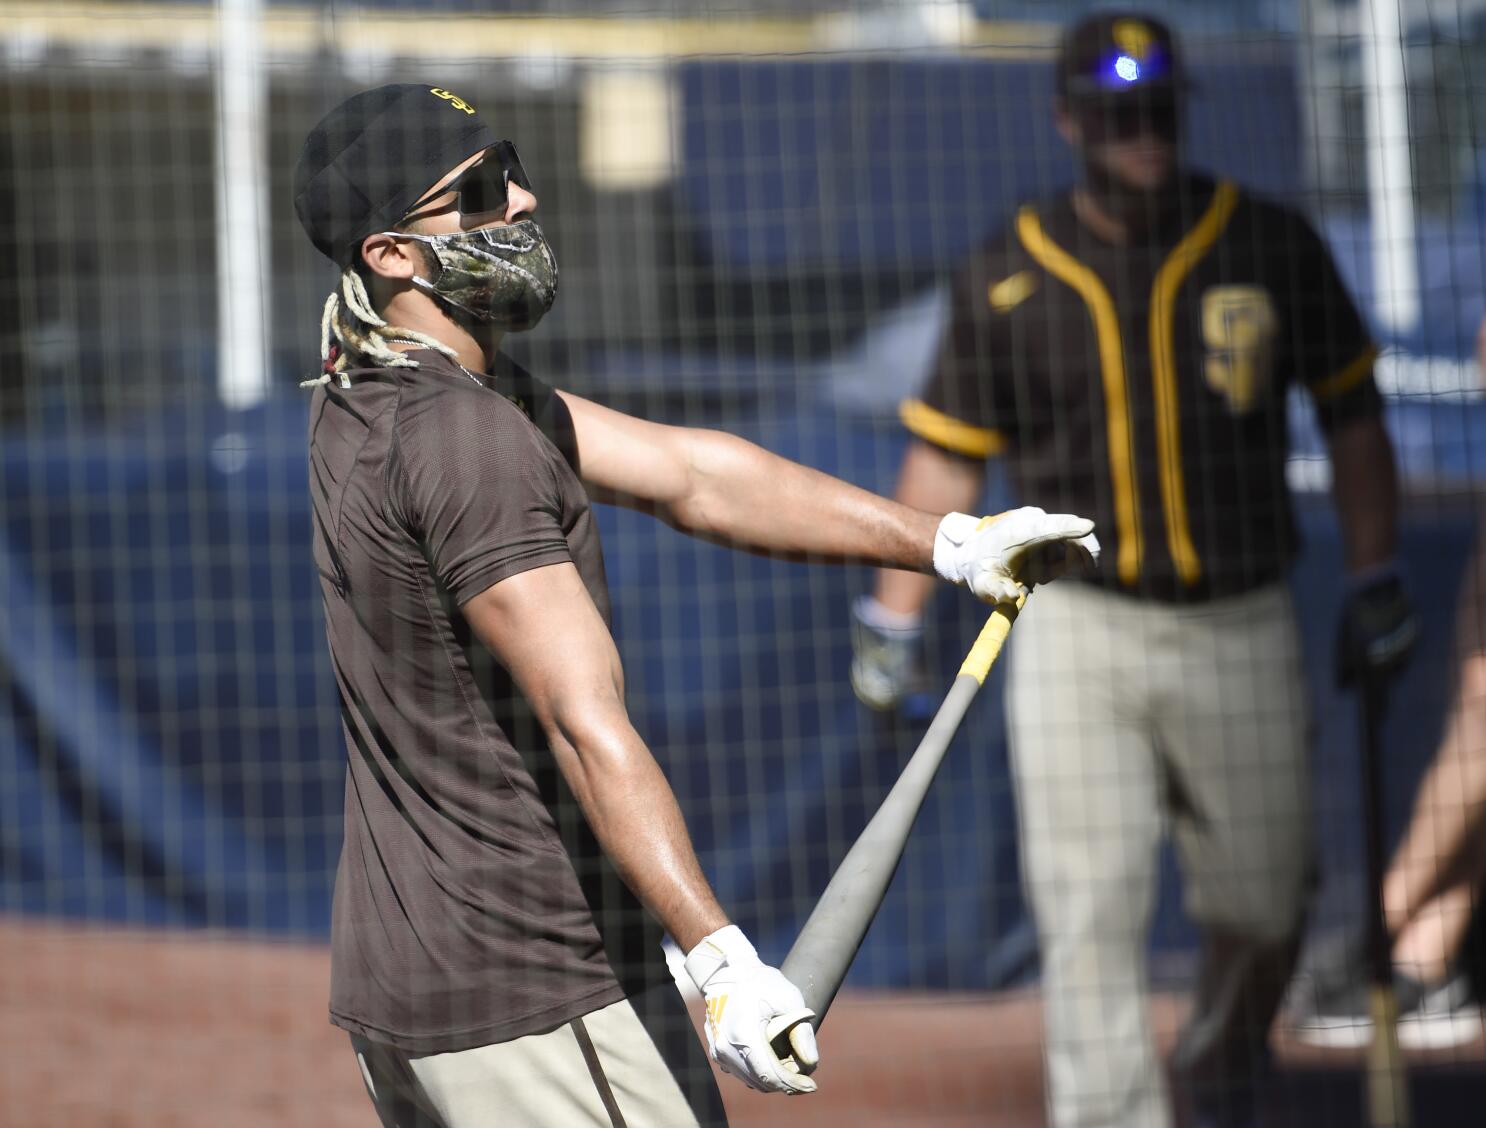 Fans, Padres react to camouflage criticism - The San Diego Union-Tribune